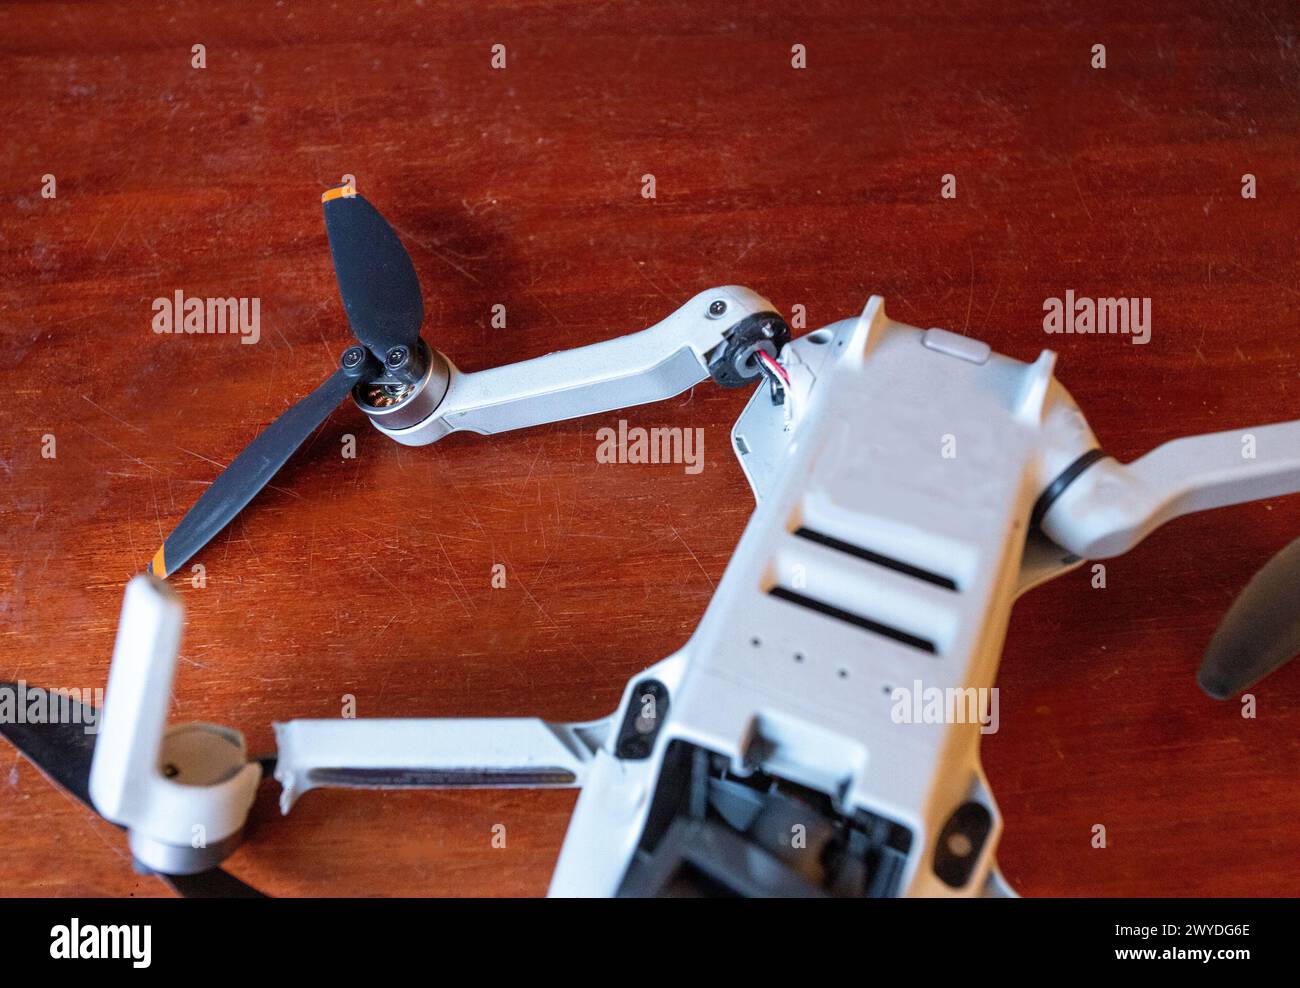 Broken drone (unrecognizable model) on wooden surface. 2 'legs'broken from one side. Drone crashed in Washington DC Stock Photo